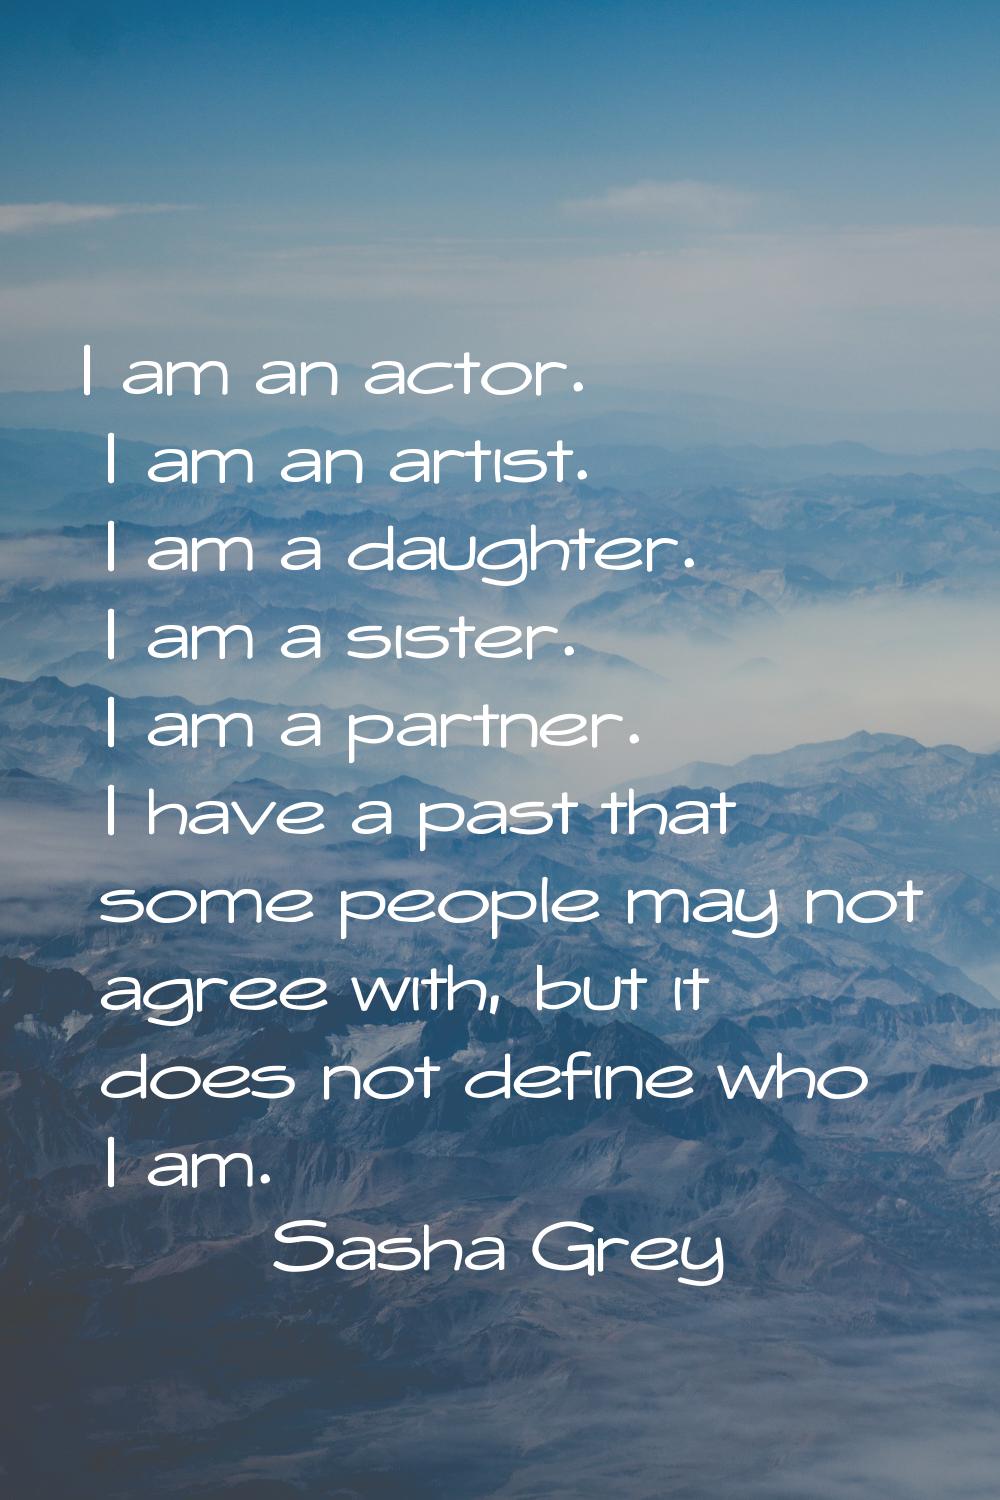 I am an actor. I am an artist. I am a daughter. I am a sister. I am a partner. I have a past that s